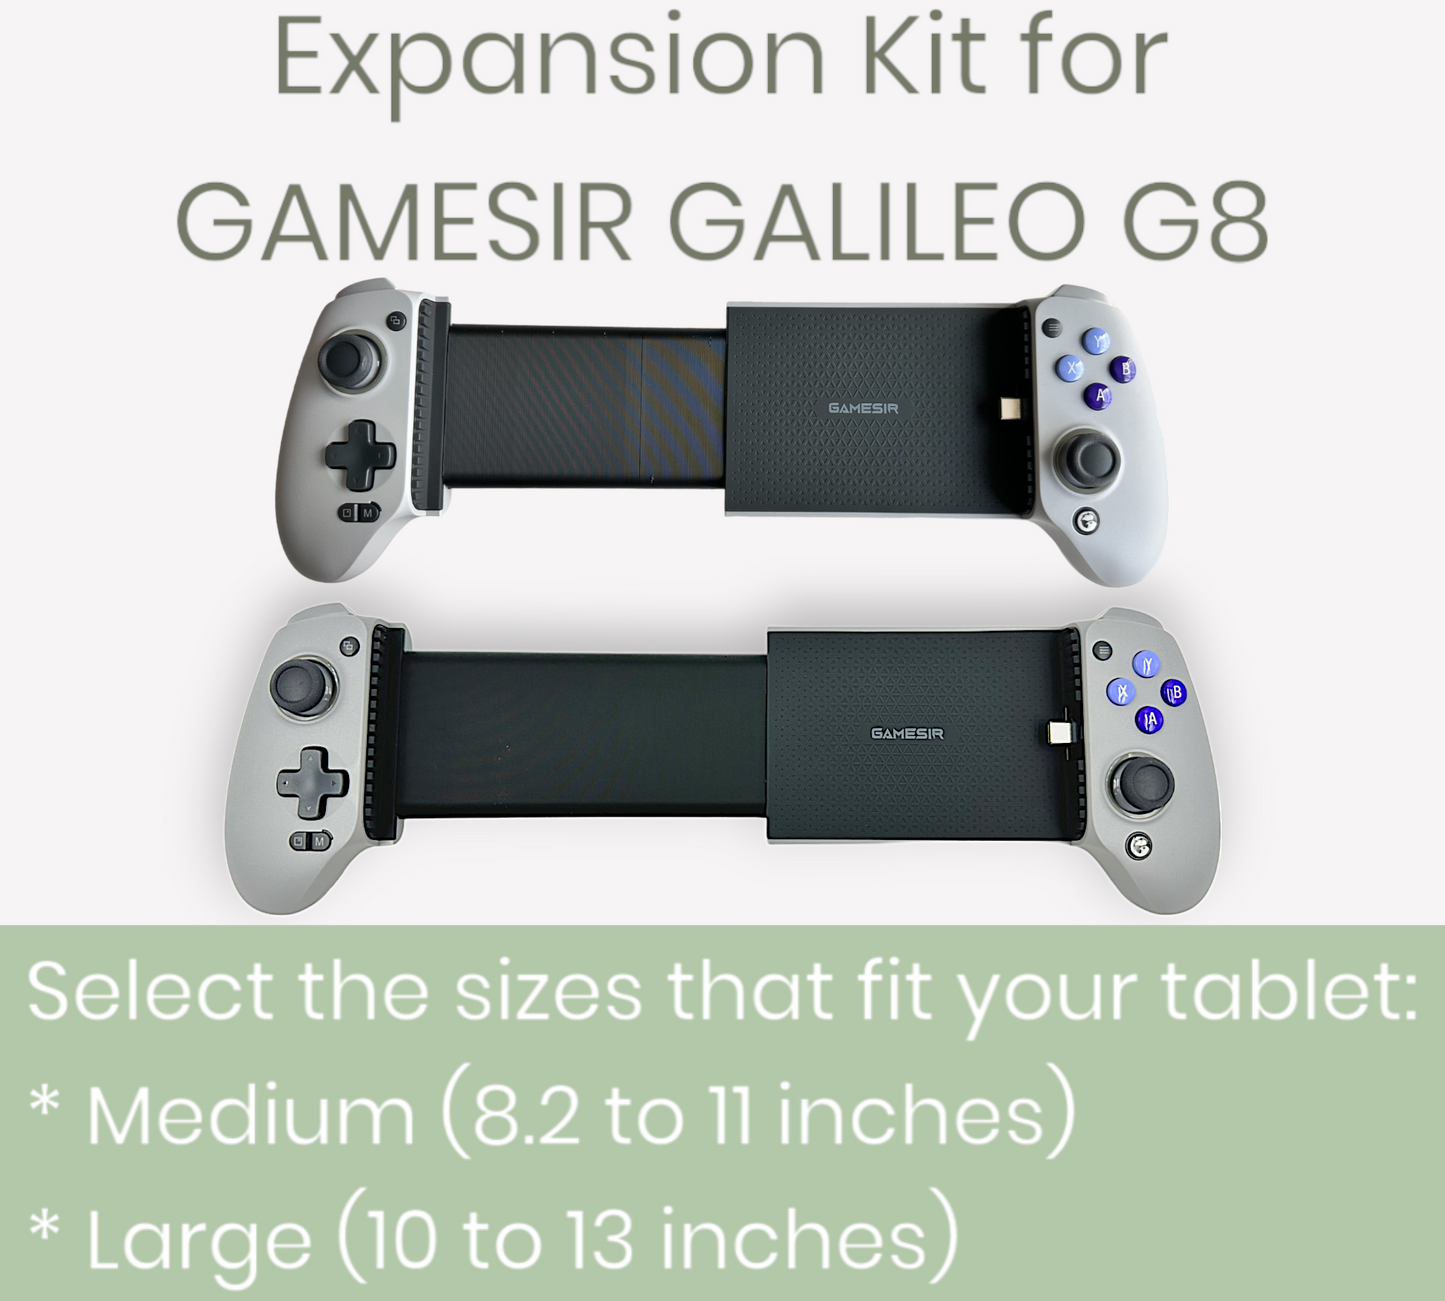 Expansion Kit for GAMESIR GALILEO G8 Controller (This is not a Controller)